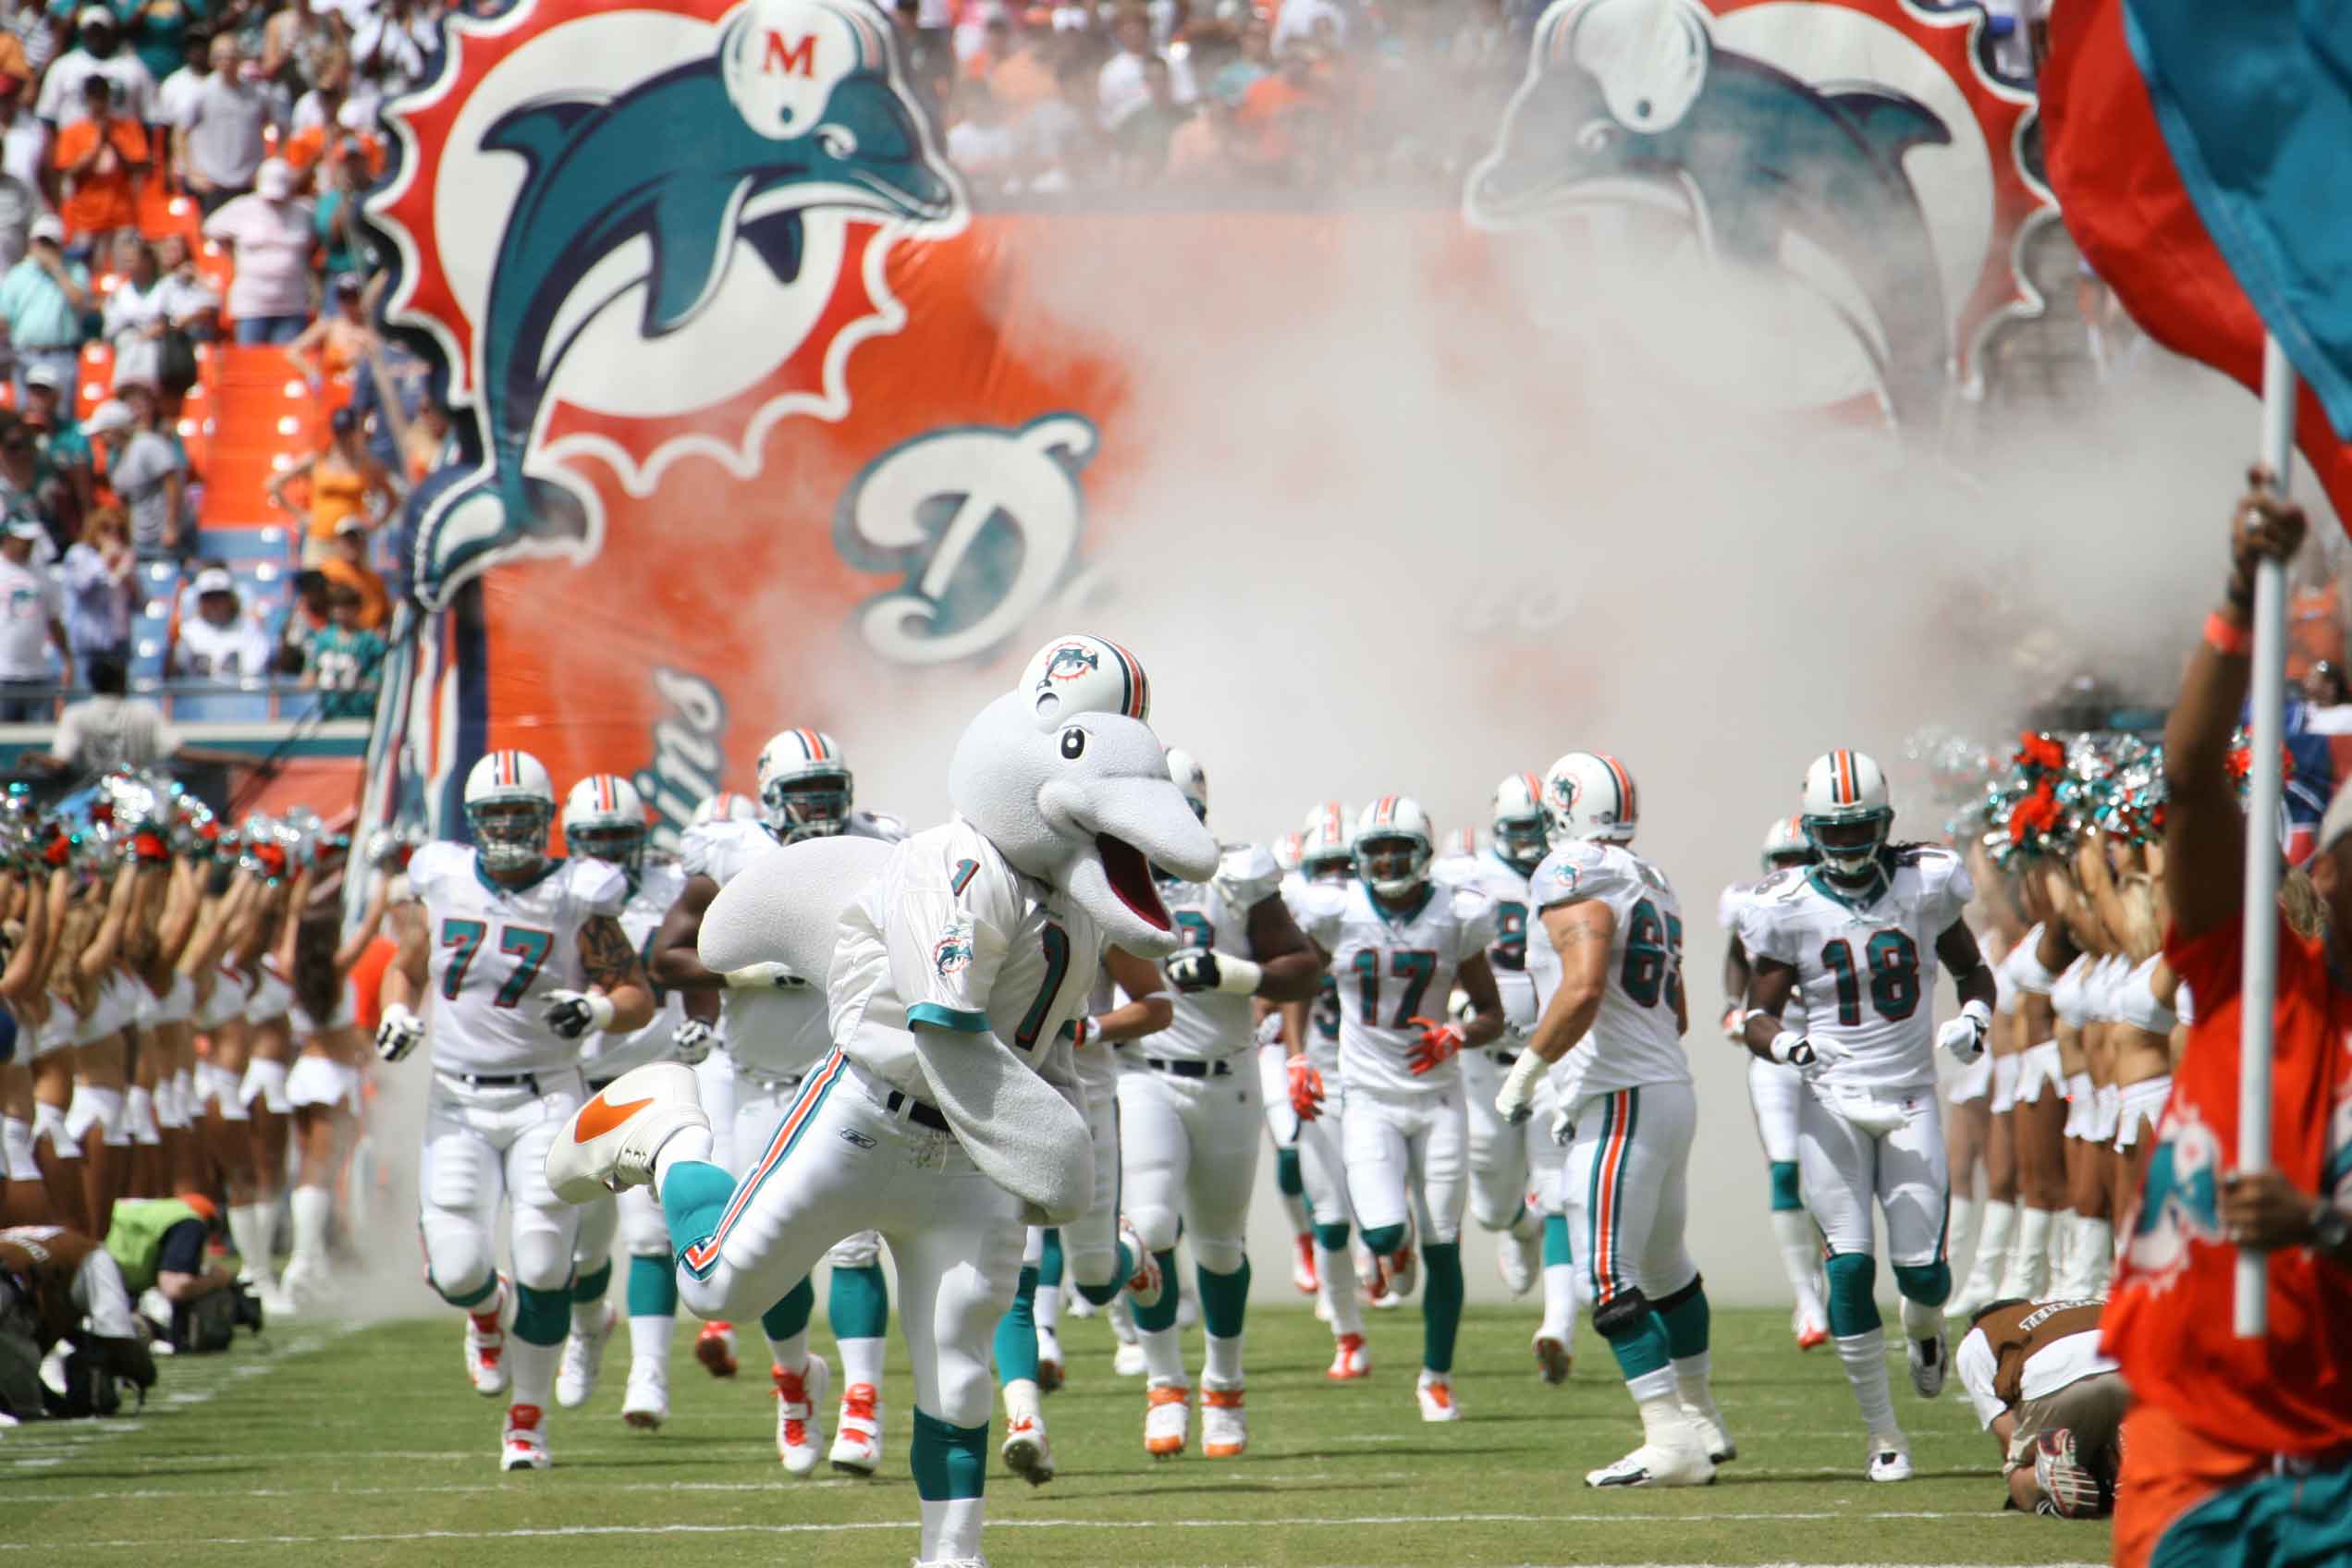 Most Fans have changed their opinion on the Dolphins direction, today Miami can get end the disrespect.